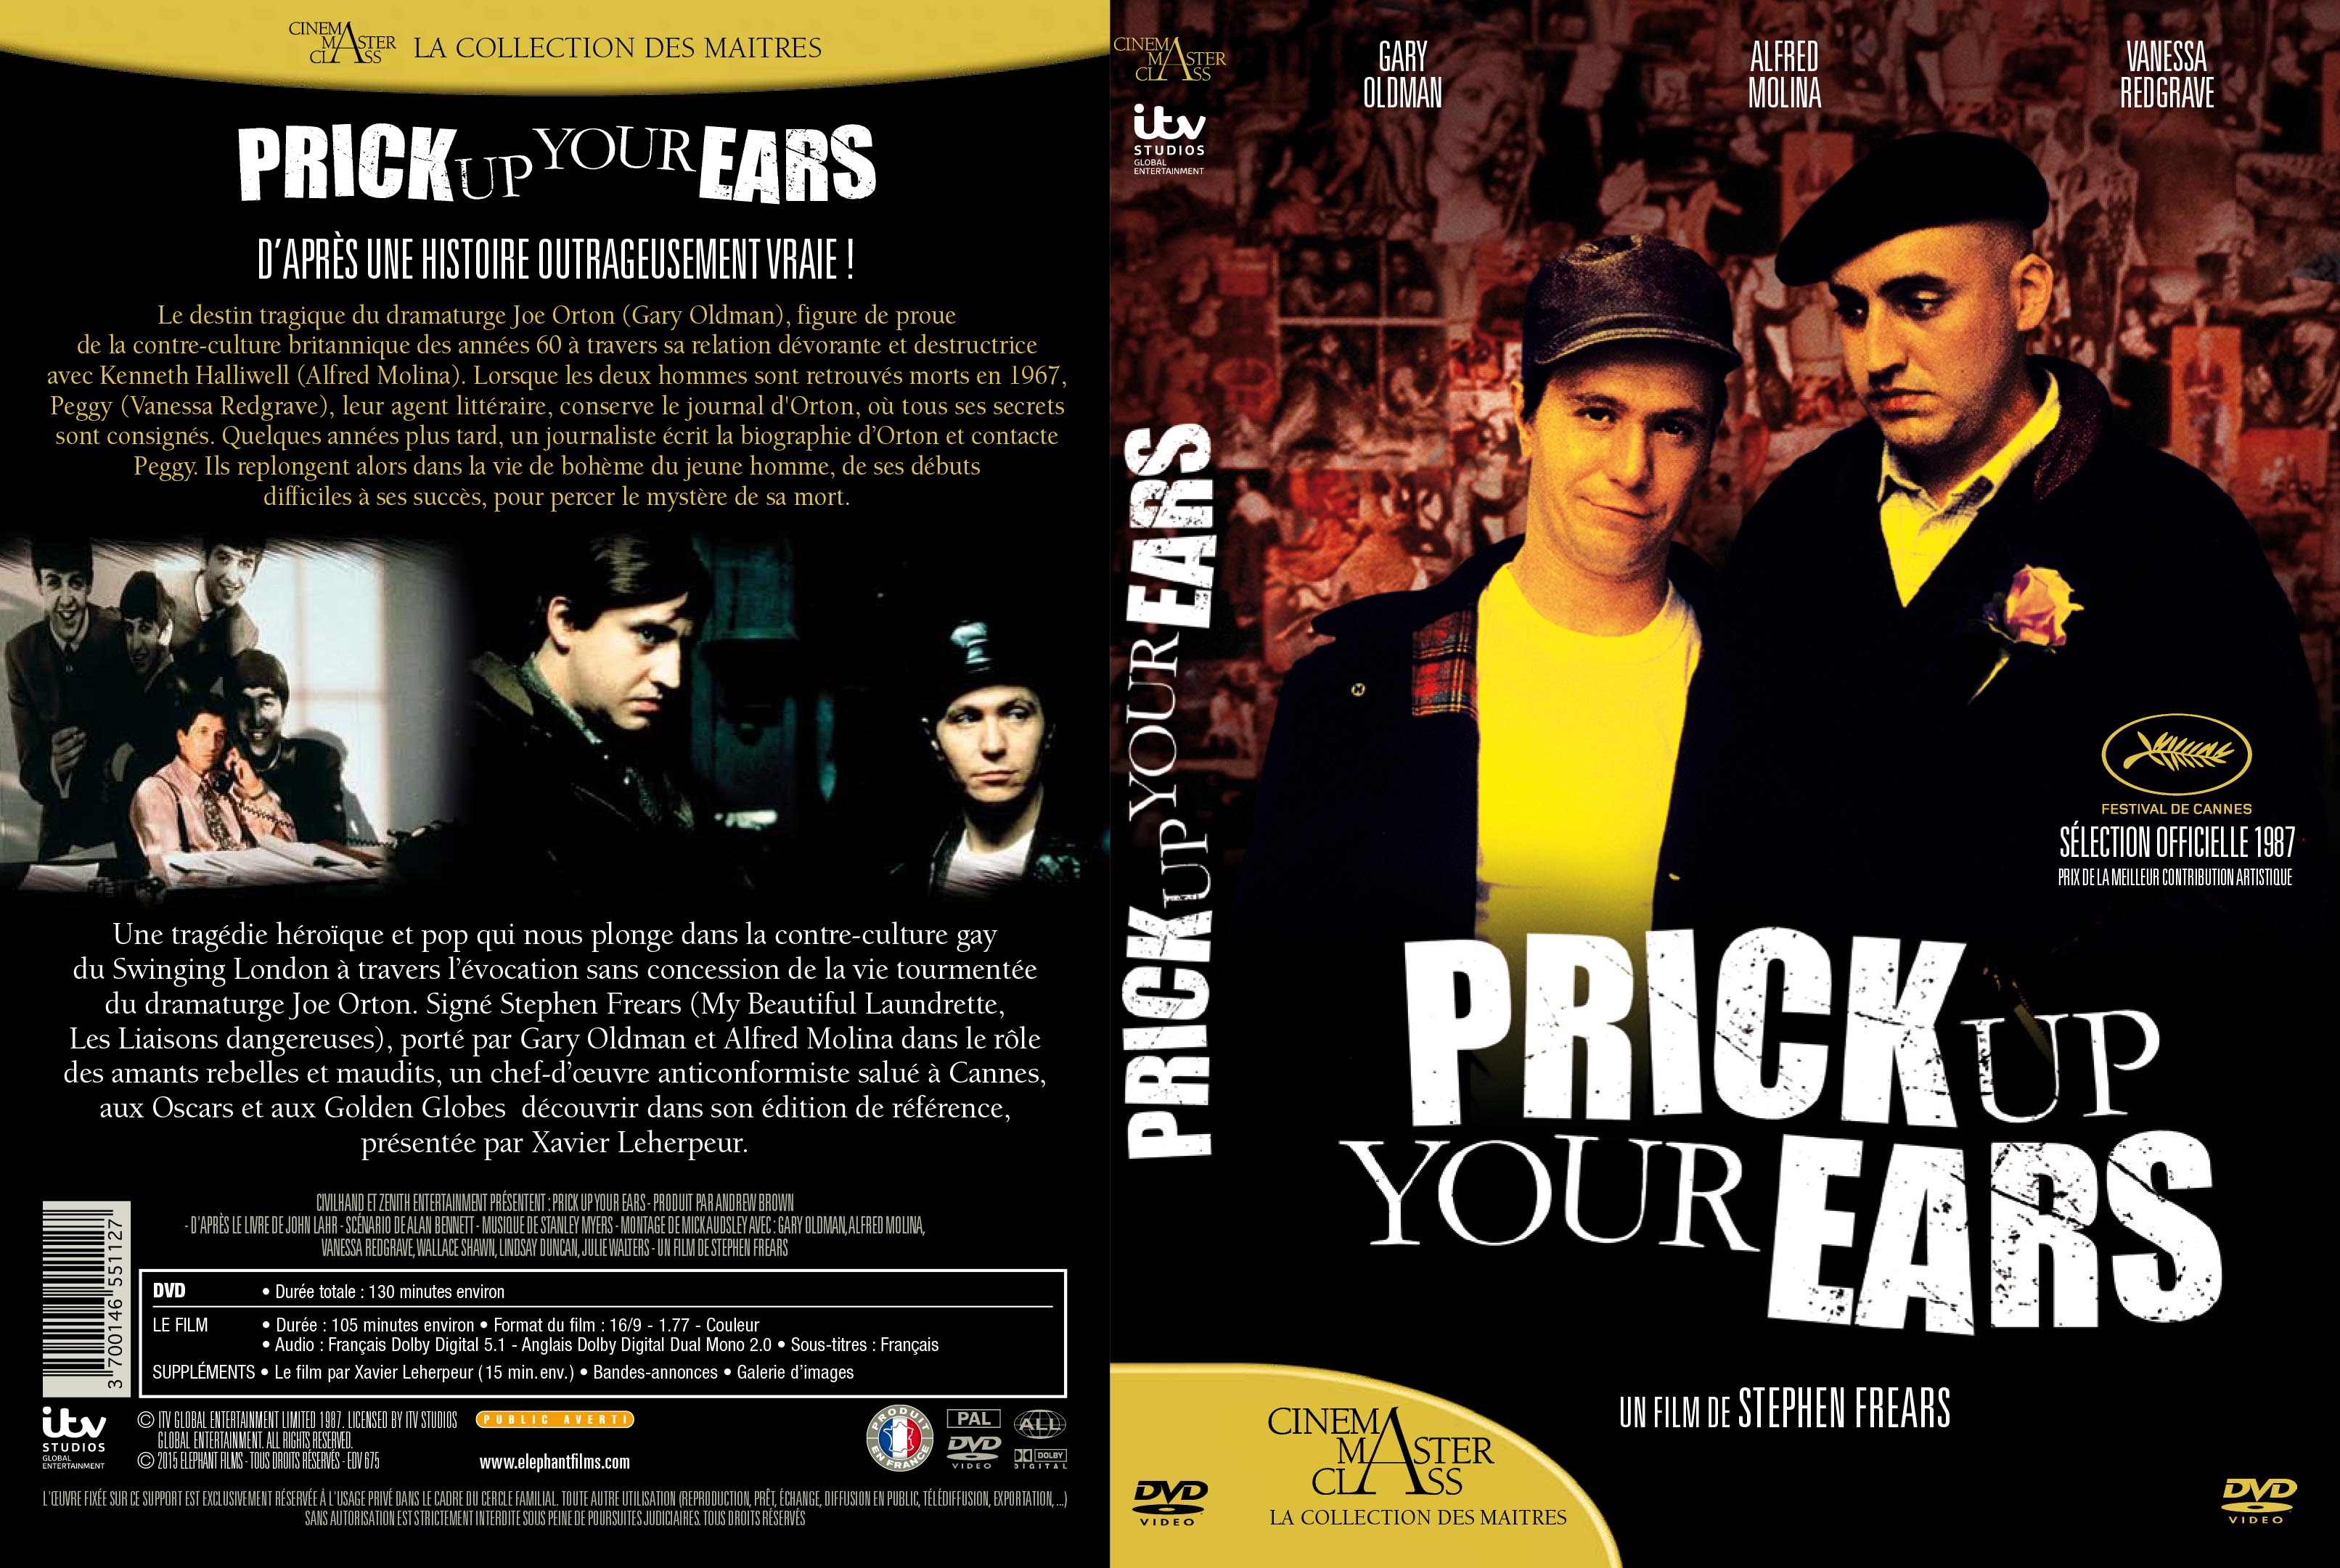 Jaquette DVD Prick up your ears v2